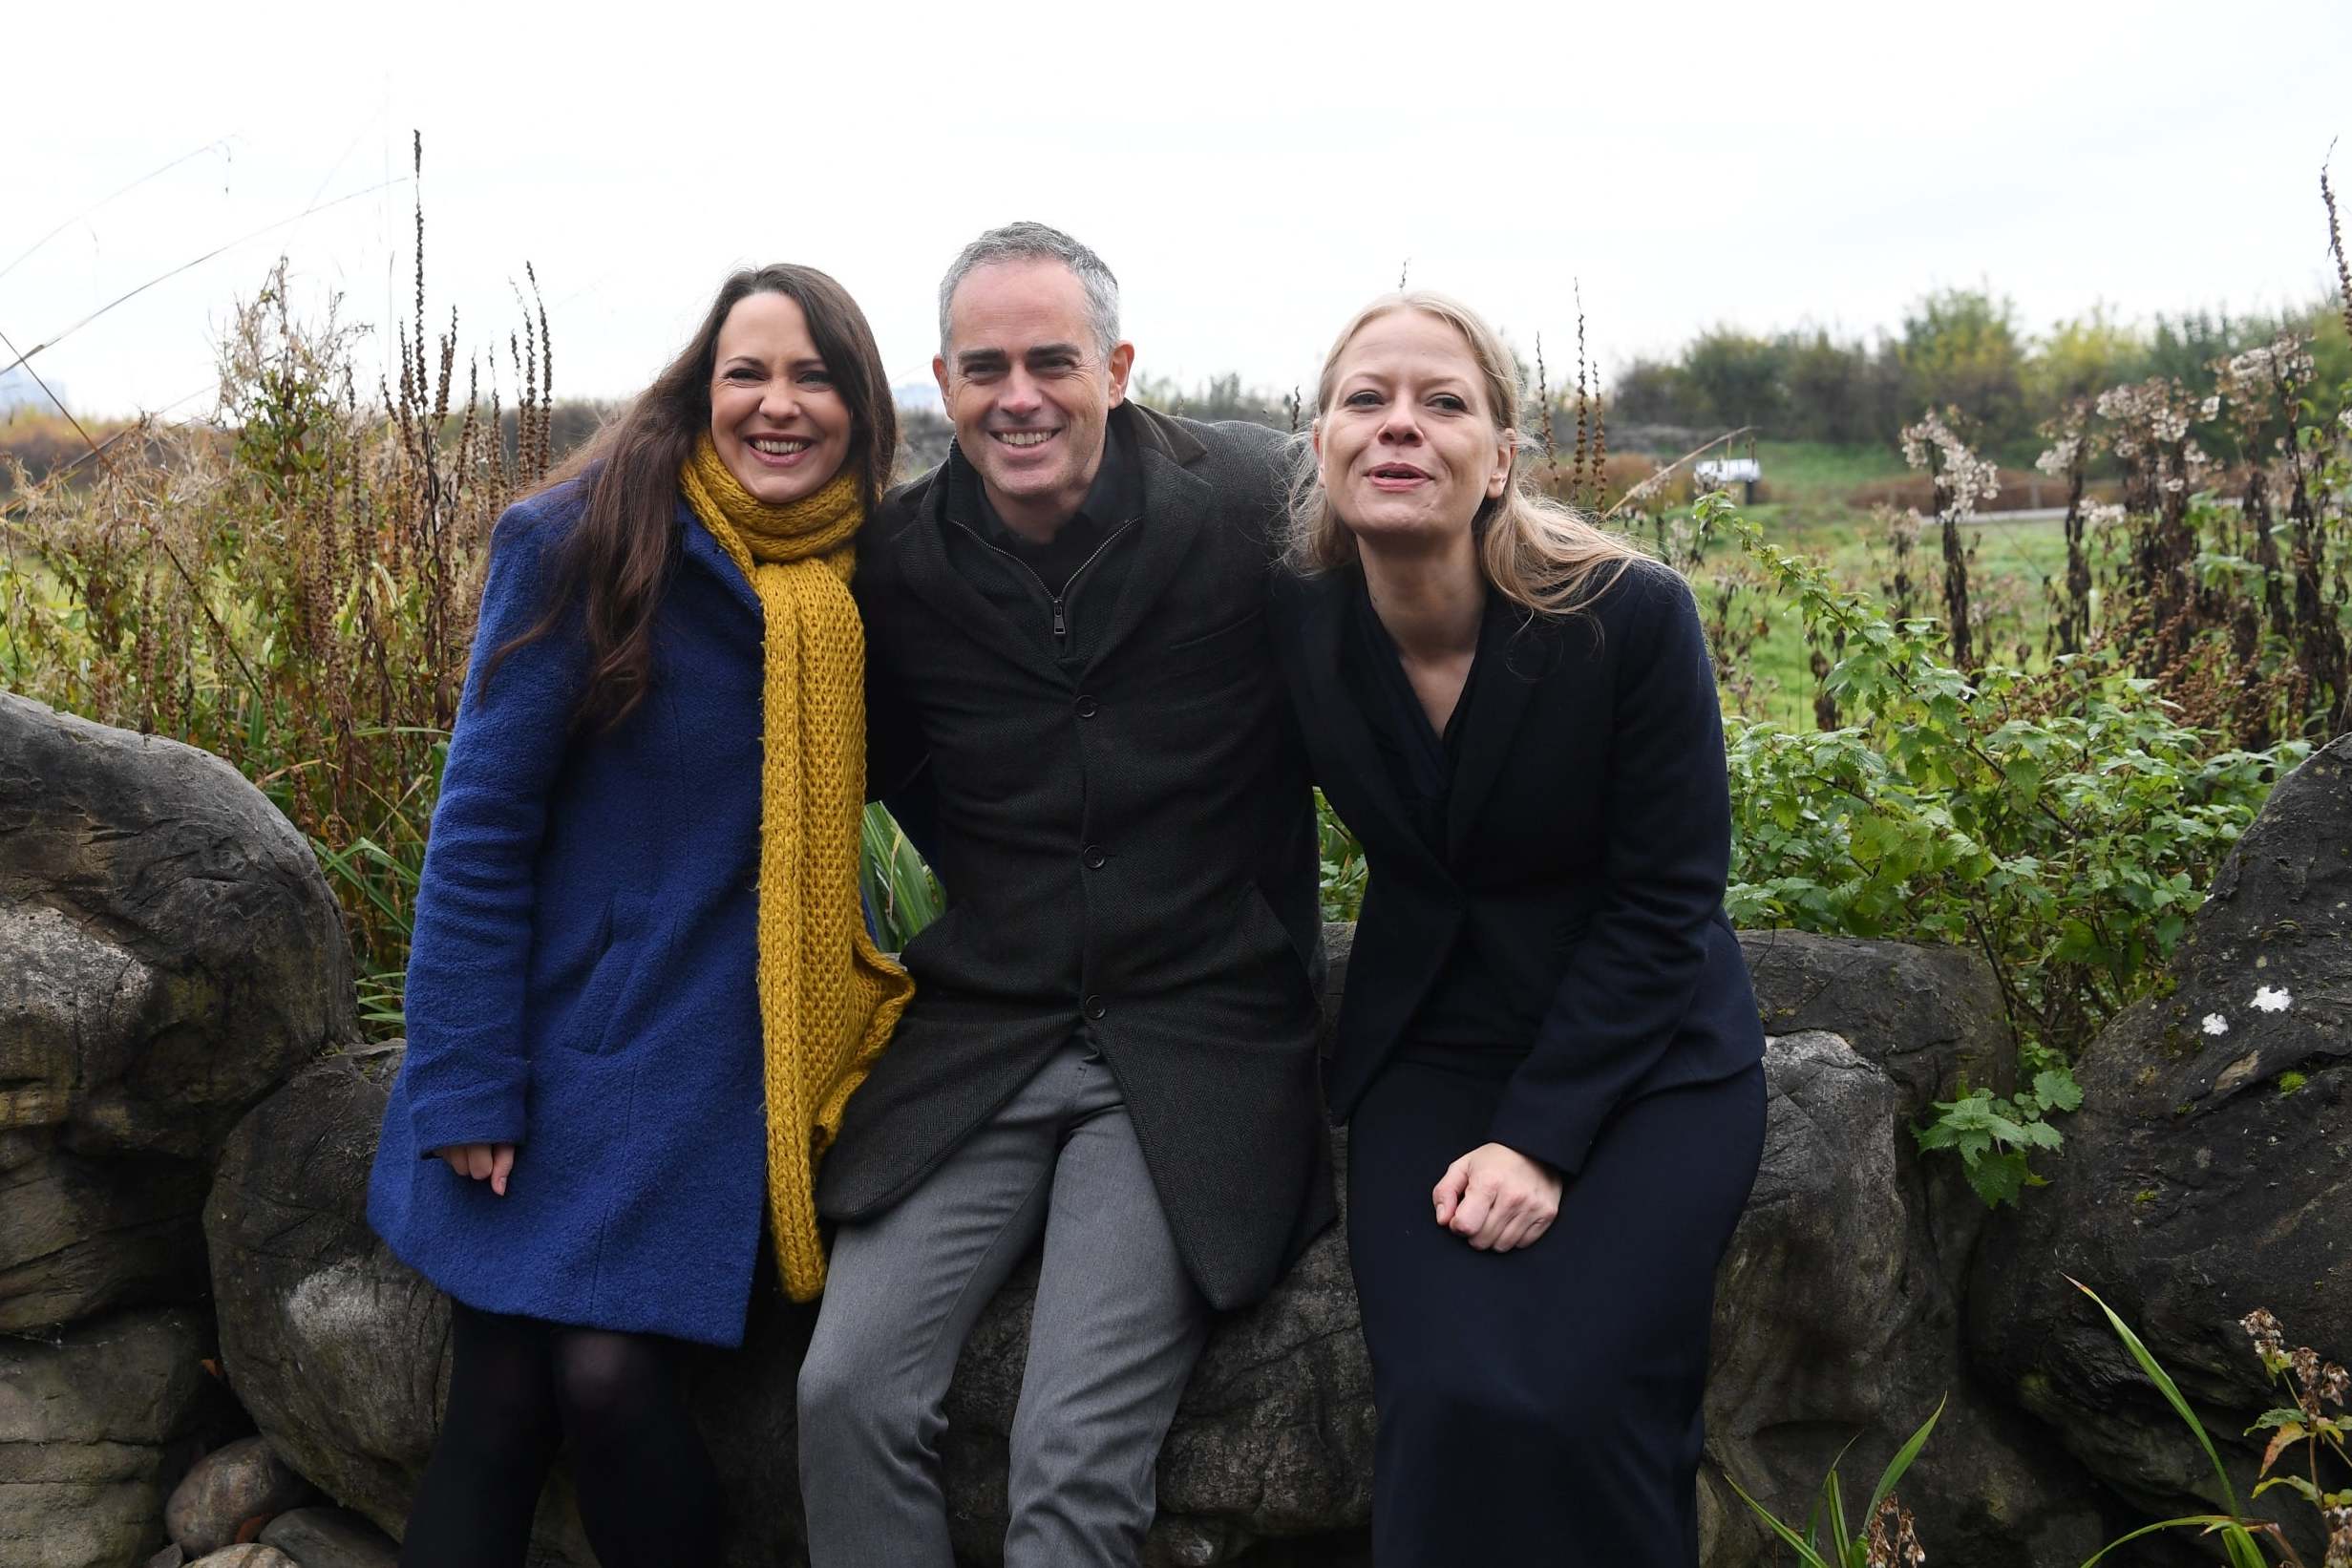 Former Green Party co-leader Jonathan Bartley with Sian Berry (right) and deputy leader Amelia Womack